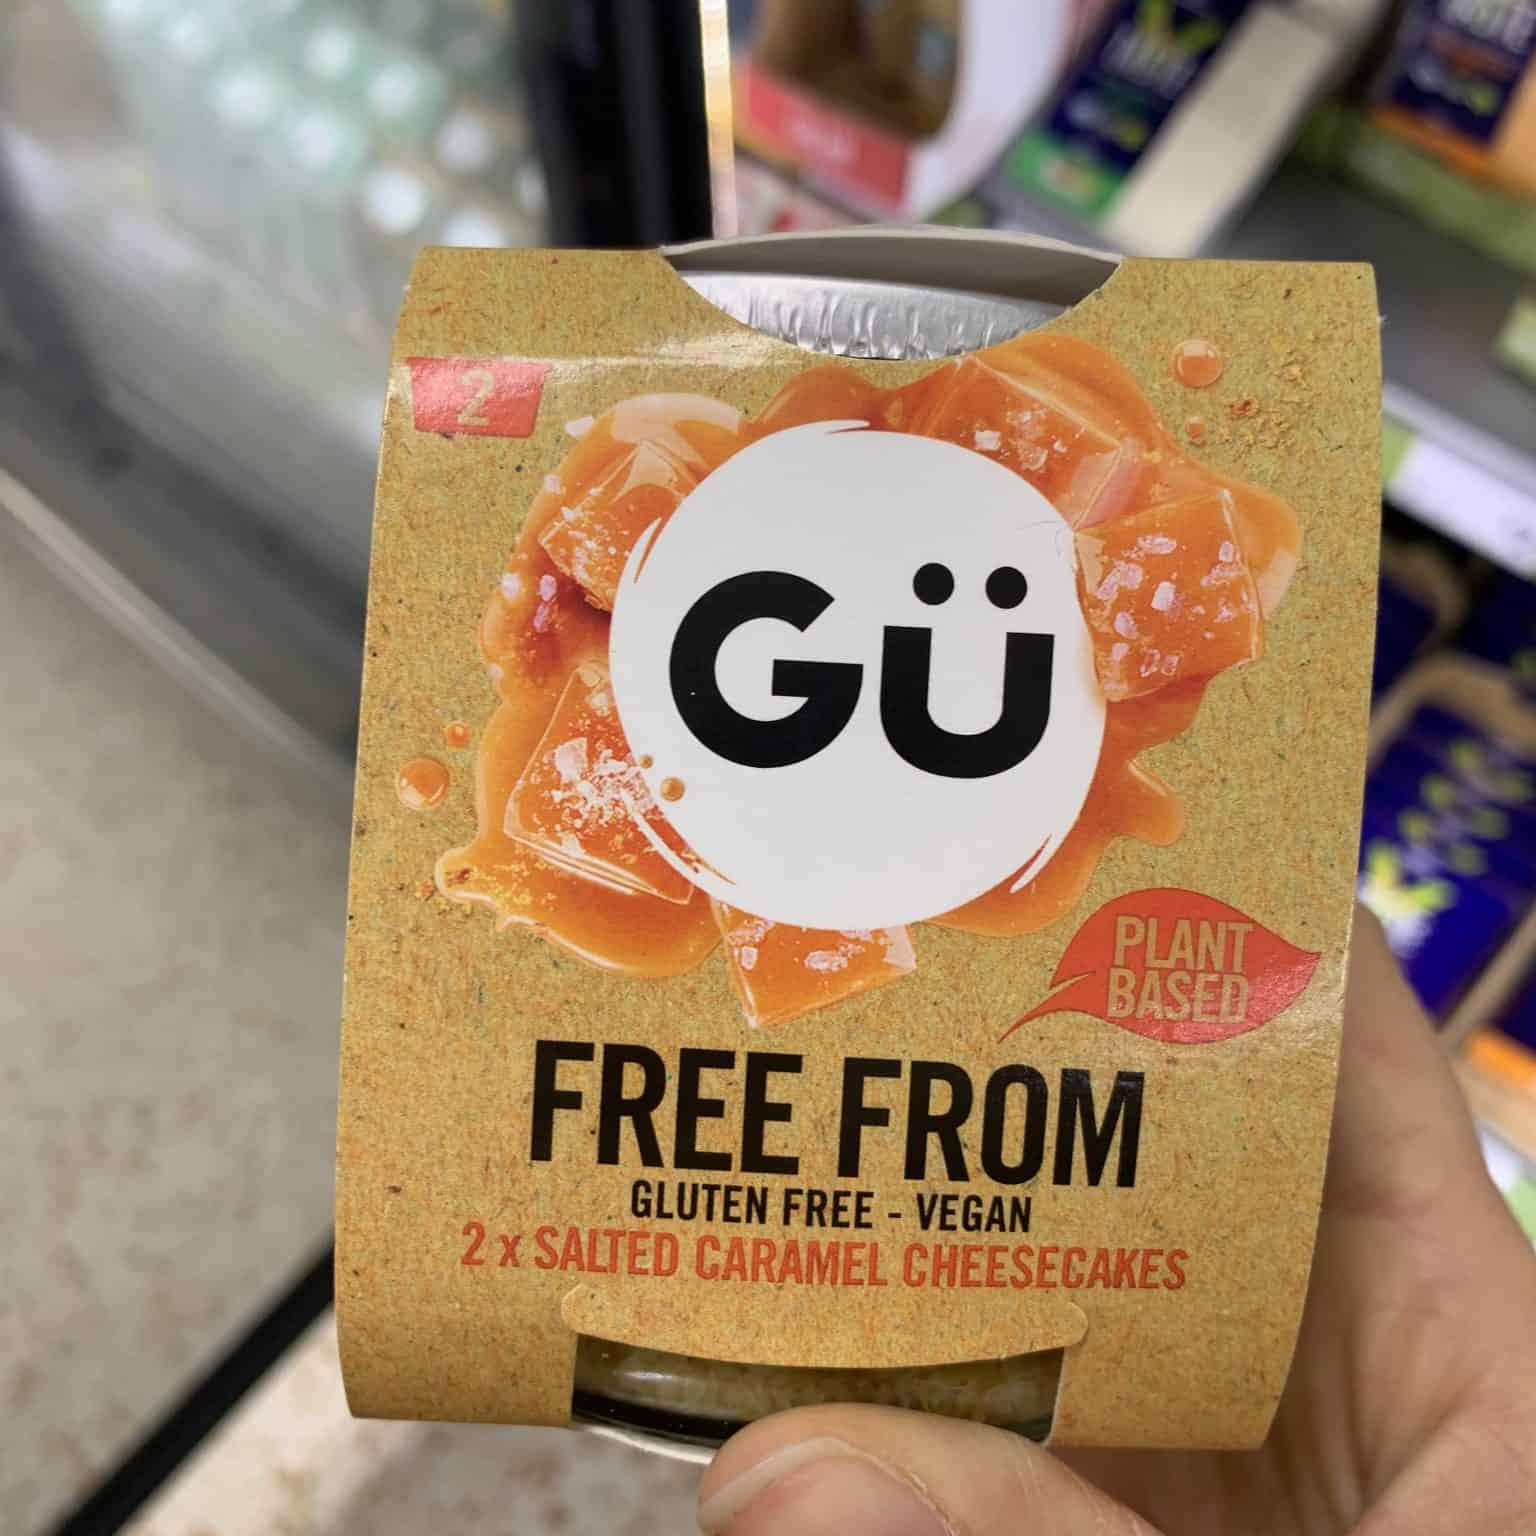 15 new gluten free products to look out for - The Gluten Free Blogger